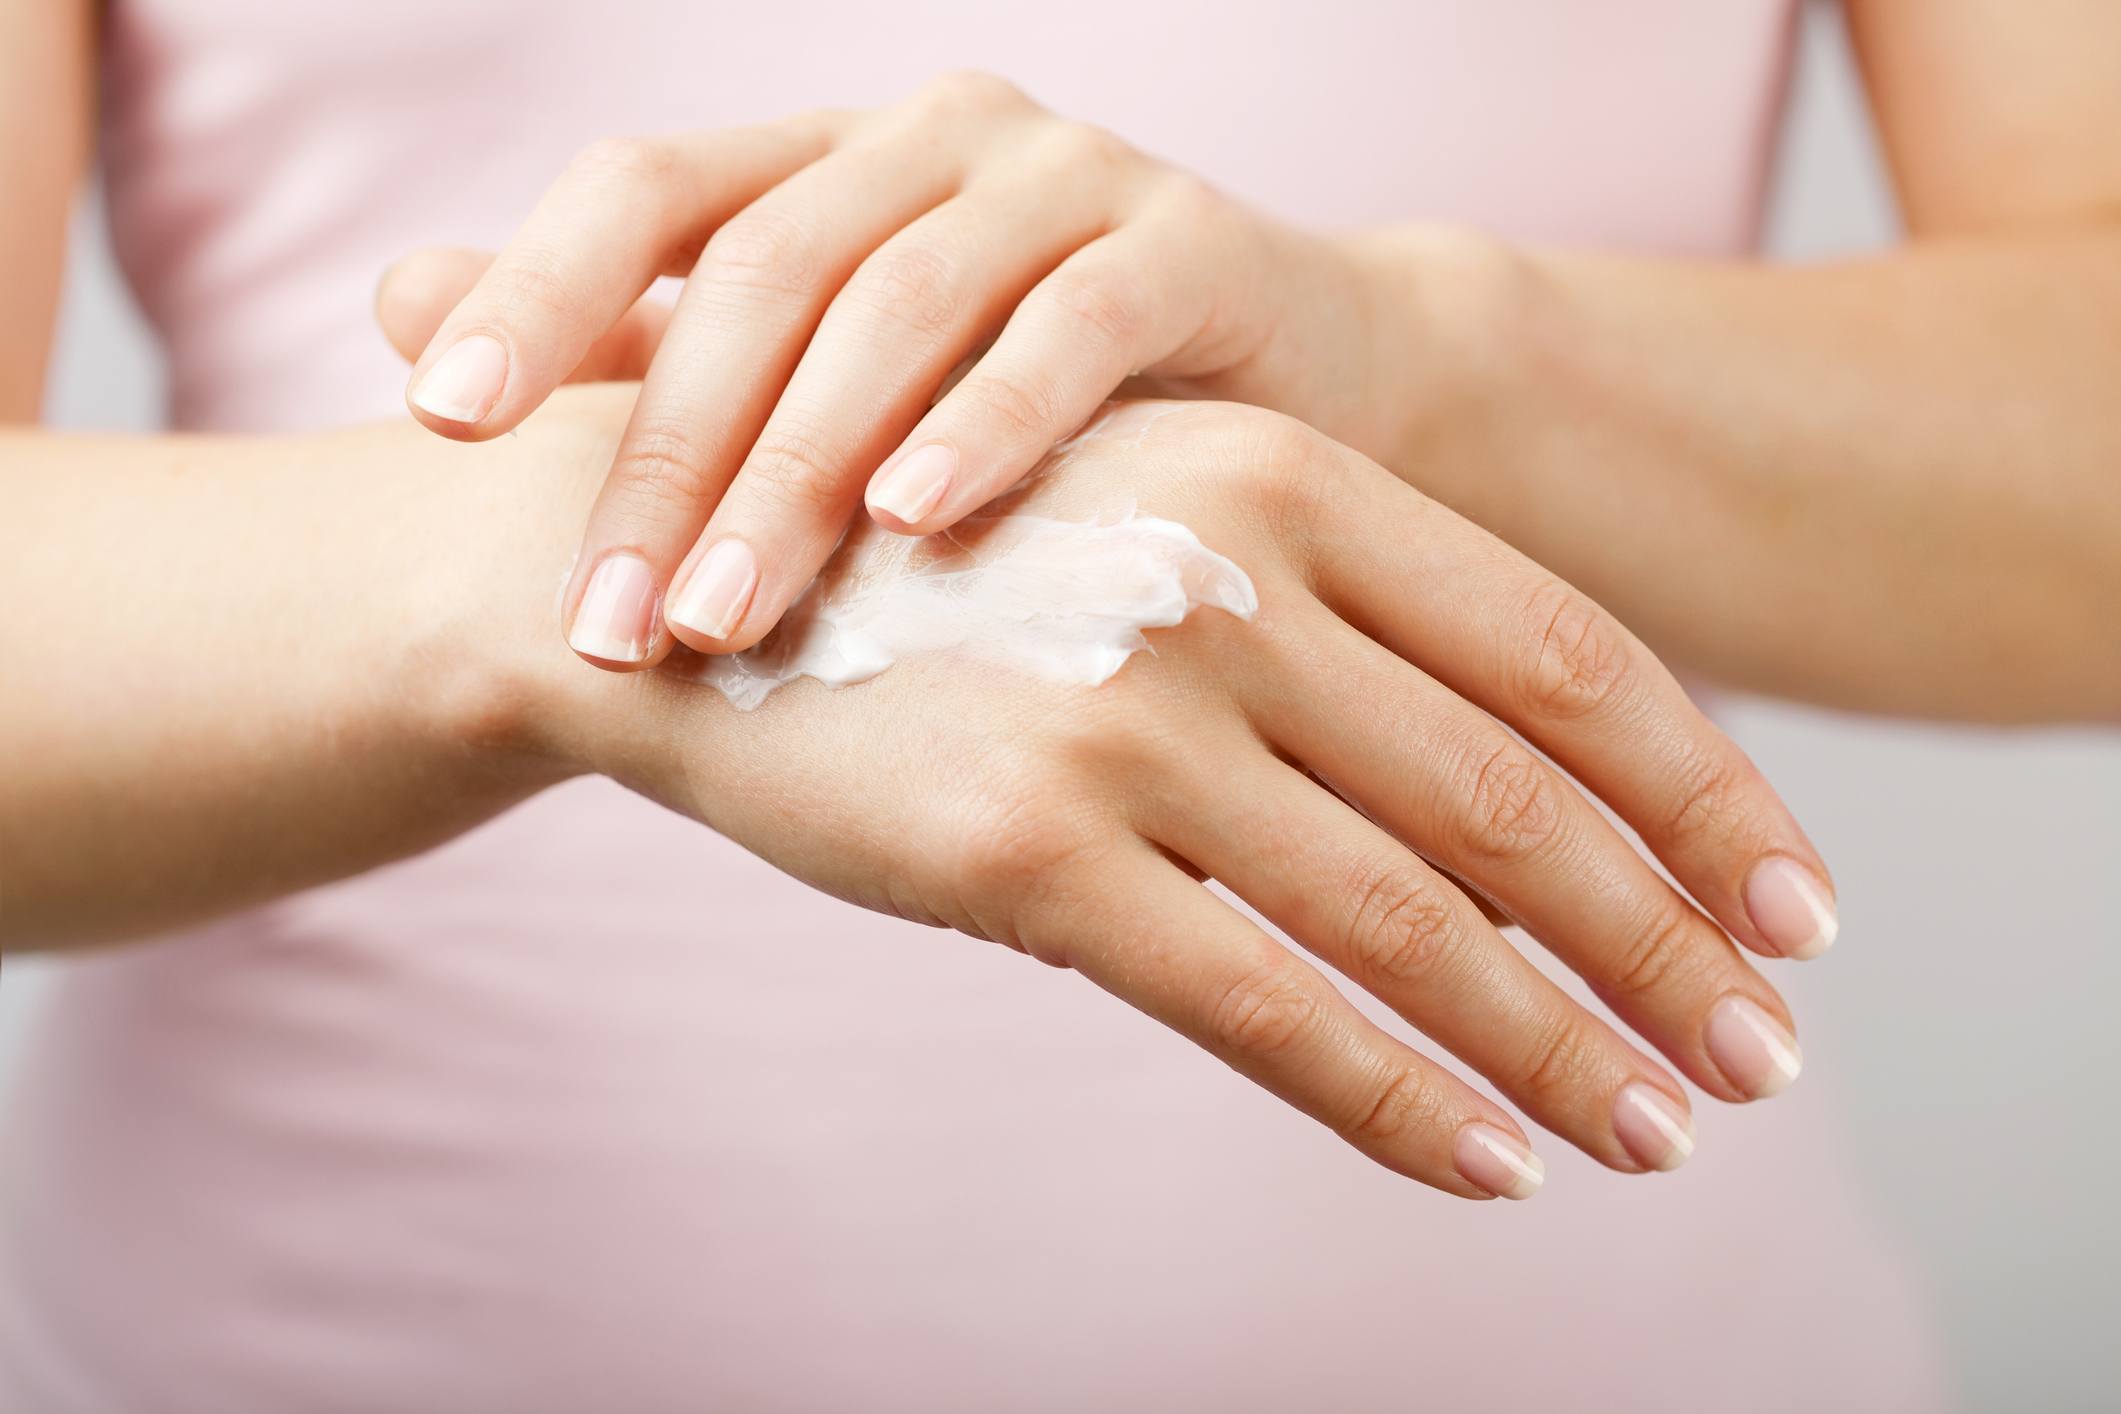 The No. 1 Skin Care Product You Need For Younger-Looking Hands